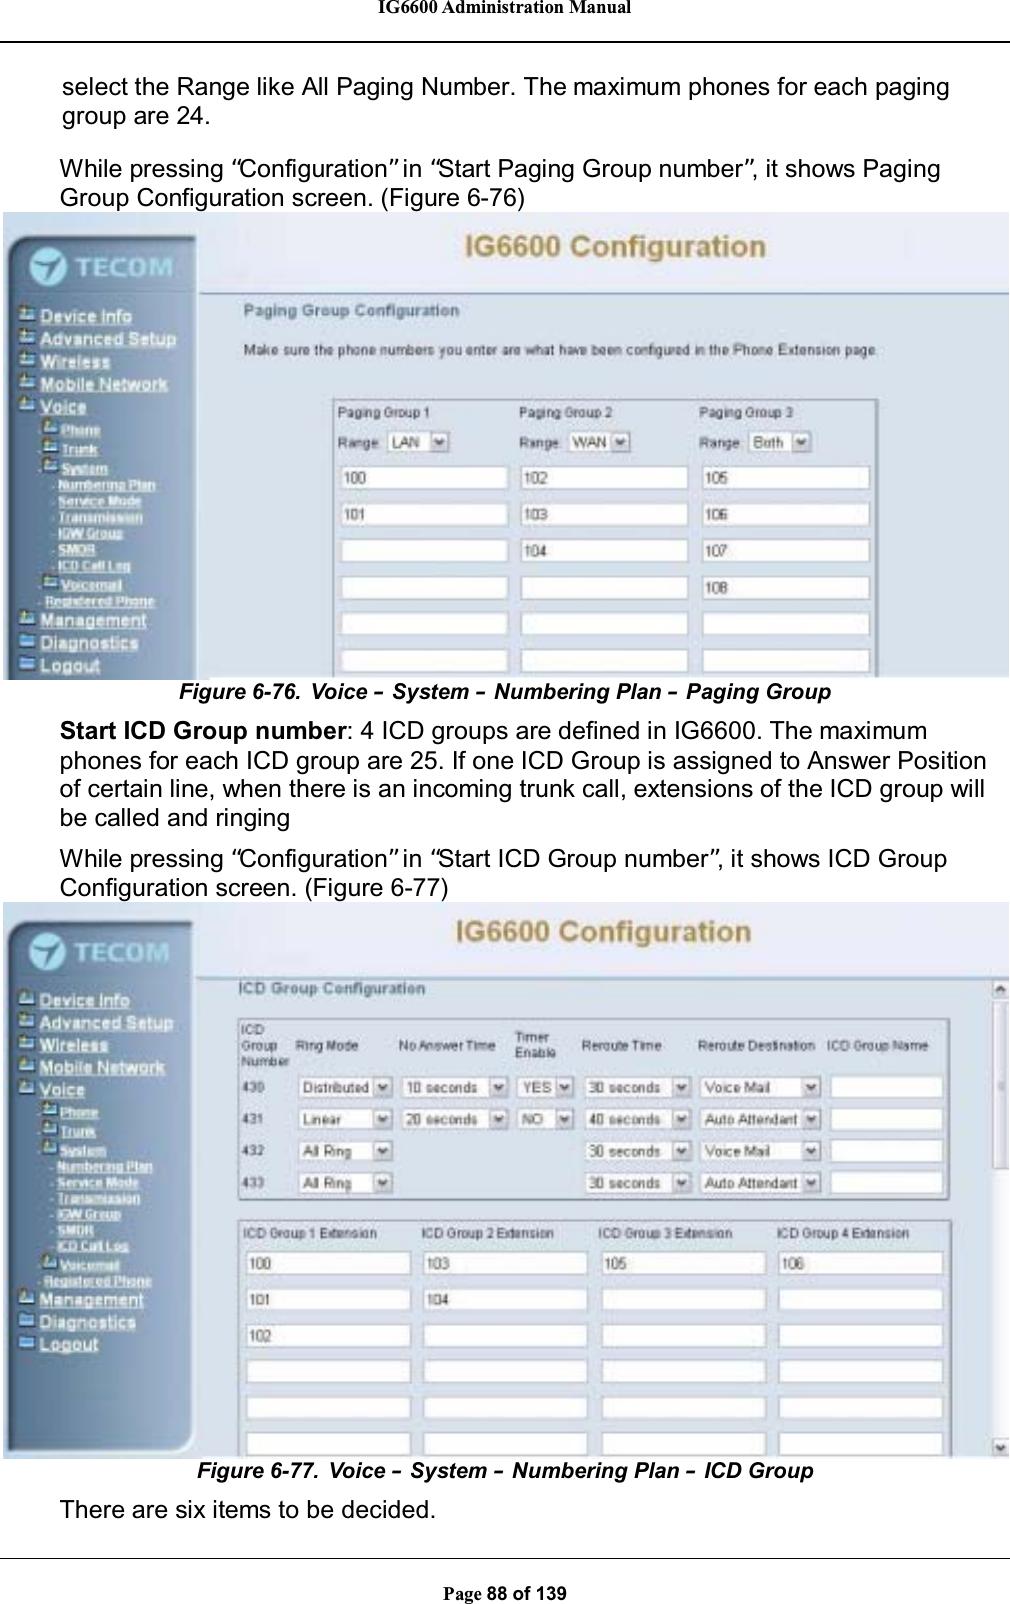 IG6600 Administration ManualPage 88 of 139select the Range like All Paging Number. The maximum phones for each paginggroup are 24.While pressing “Configuration”in “Start Paging Group number”, it shows PagingGroup Configuration screen. (Figure 6-76)Figure 6-76. Voice –System –Numbering Plan –Paging GroupStart ICD Group number: 4 ICD groups are defined in IG6600. The maximumphones for each ICD group are 25. If one ICD Group is assigned to Answer Positionof certain line, when there is an incoming trunk call, extensions of the ICD group willbe called and ringingWhile pressing “Configuration”in “Start ICD Group number”, it shows ICD GroupConfiguration screen. (Figure 6-77)Figure 6-77. Voice –System –Numbering Plan –ICD GroupThere are six items to be decided.